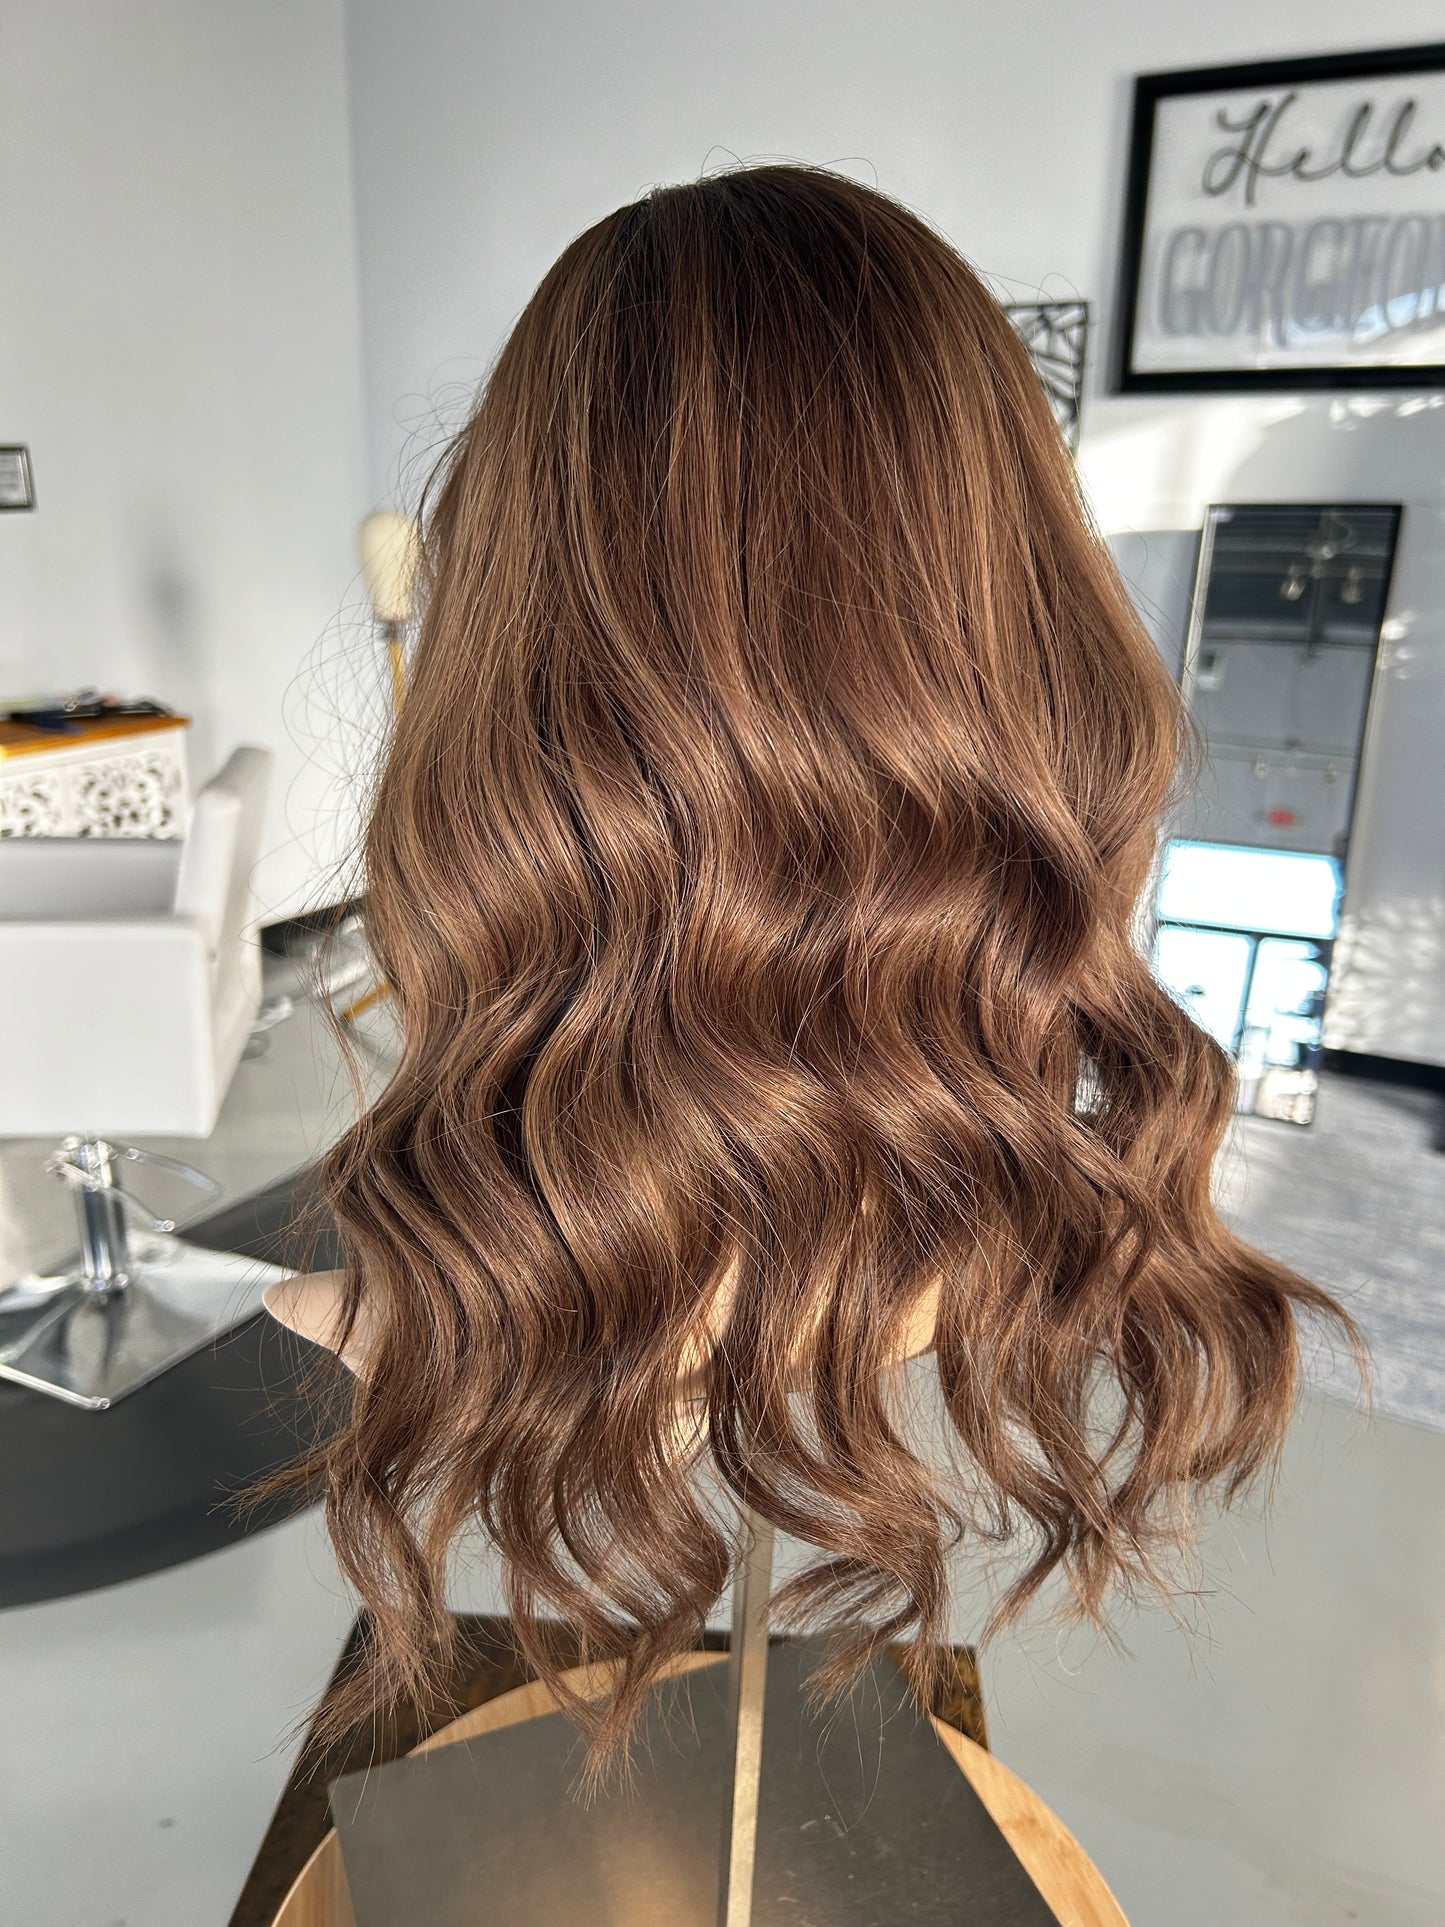 Neutral Level 4 Medium Brown with Dimensional Cool Highlights approx. Level 6 Human Hair Topper